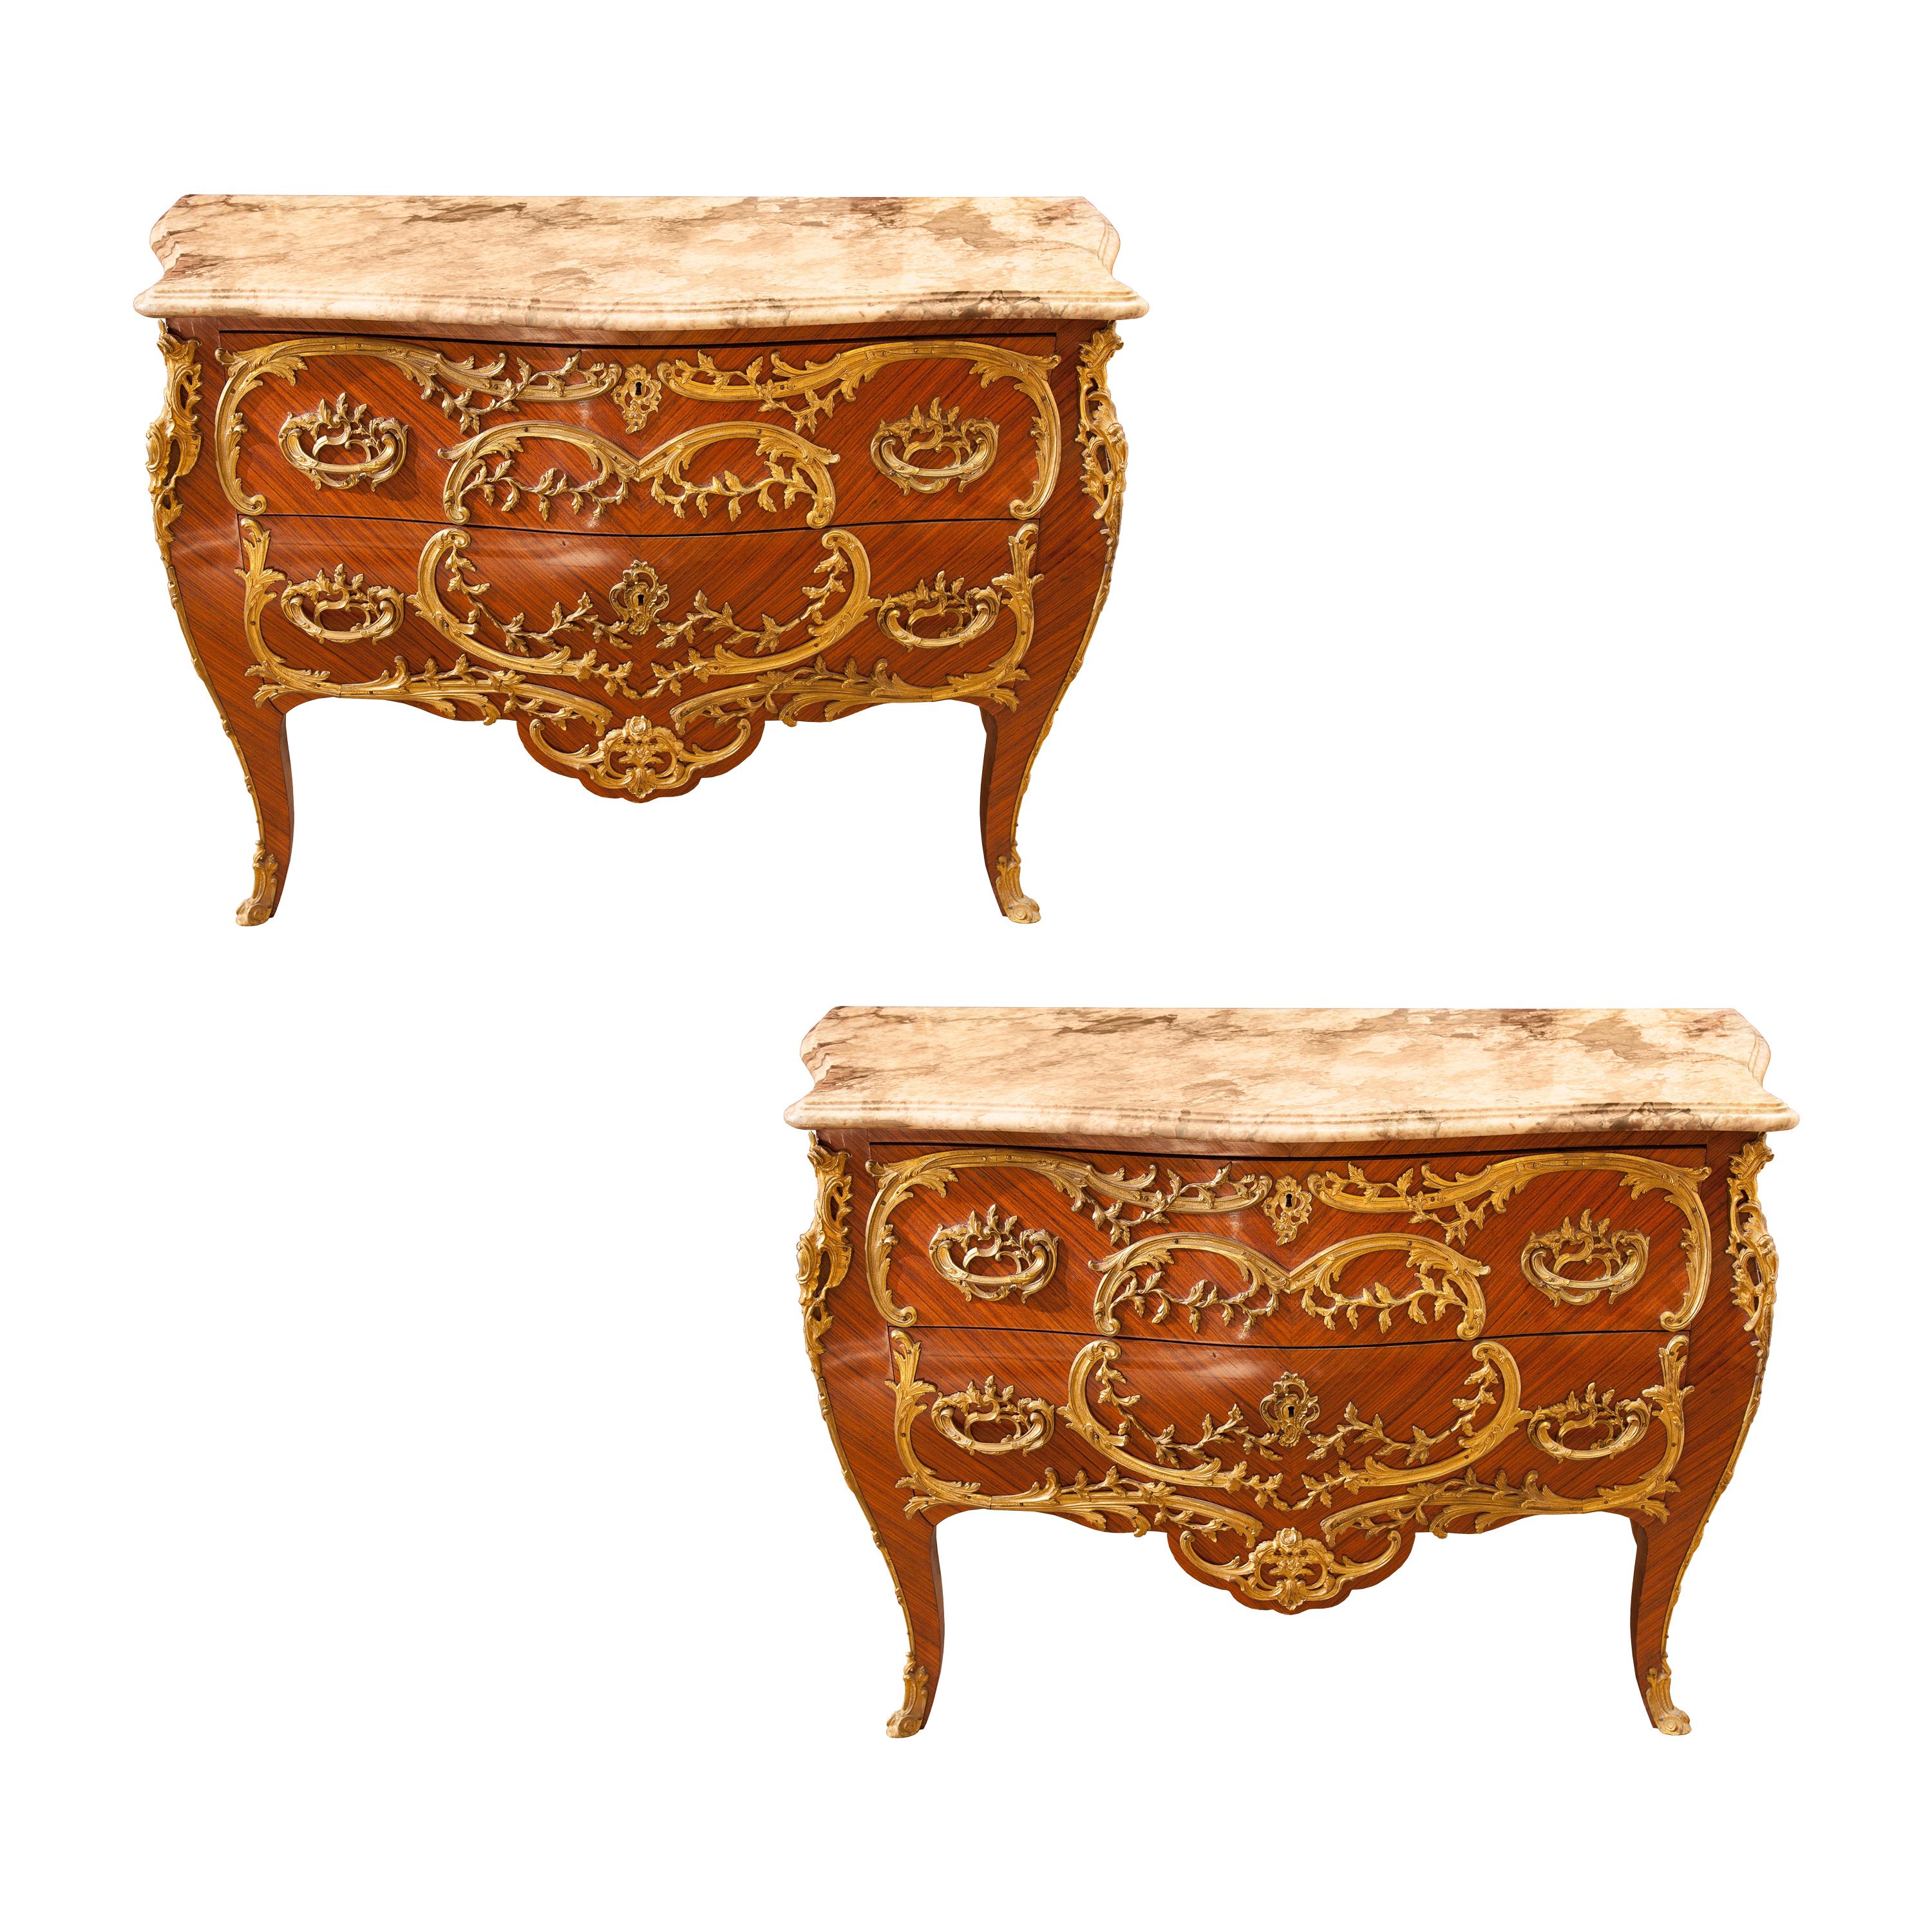 Pair of French Commodes Bombe' Form with Elaborate Bronze Mounts